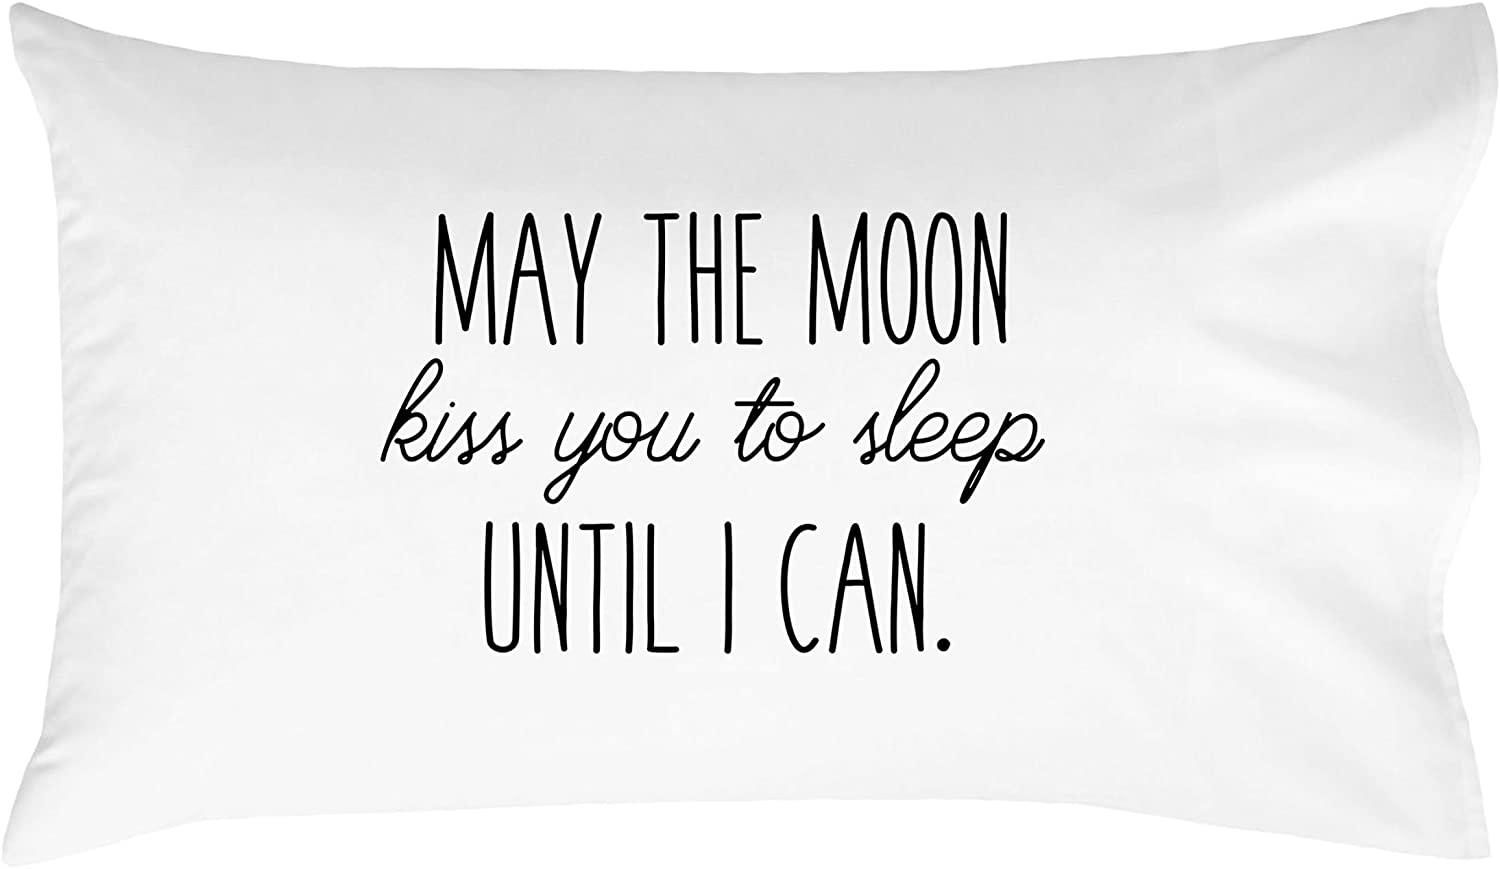 "May The Moon Kiss You To Sleep Until I Can" LDR Pillowcase (Standard Size 20x30")